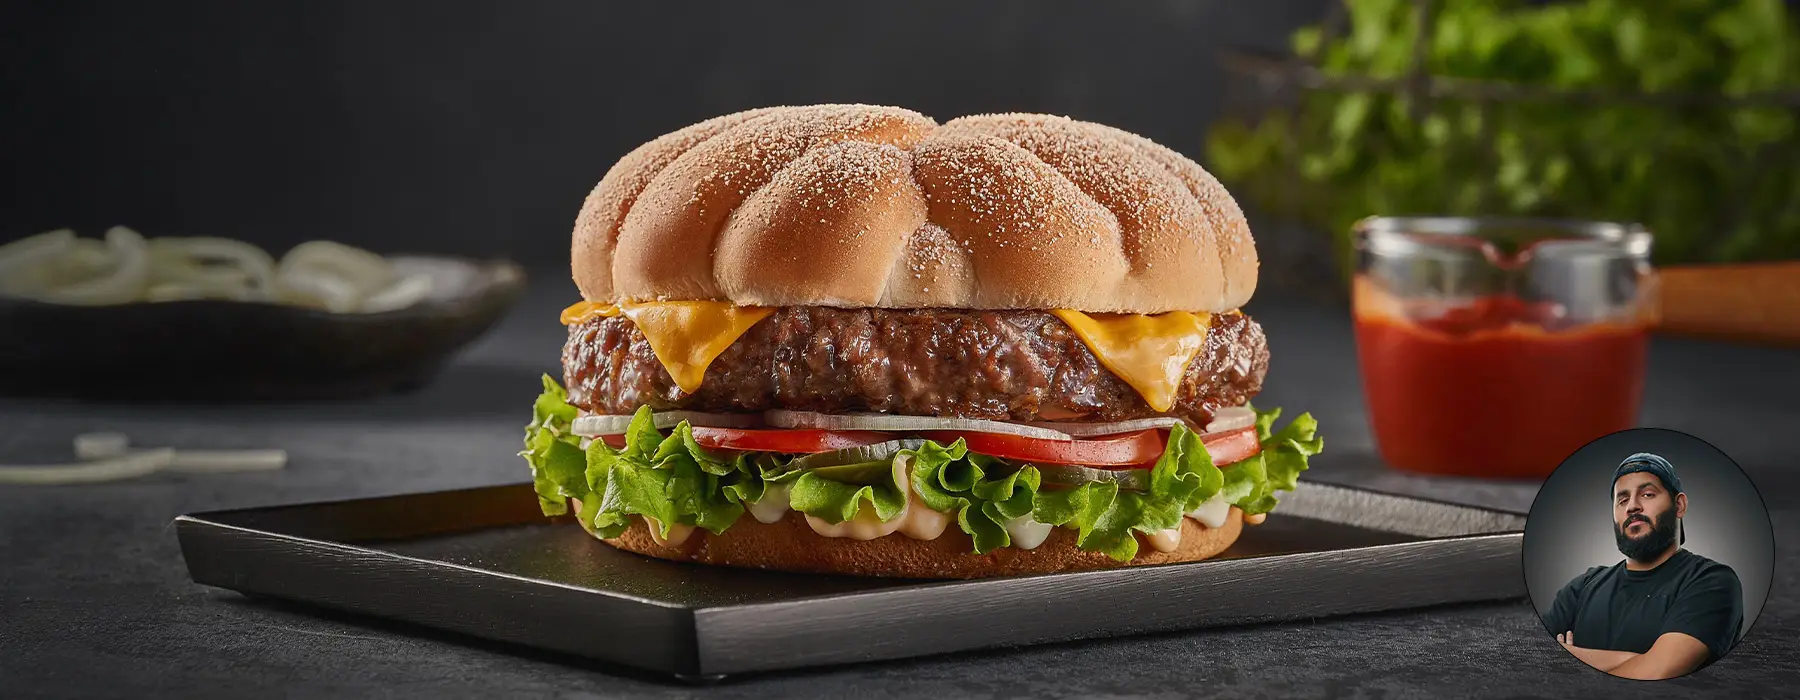 How to Photograph a Burger Professionally